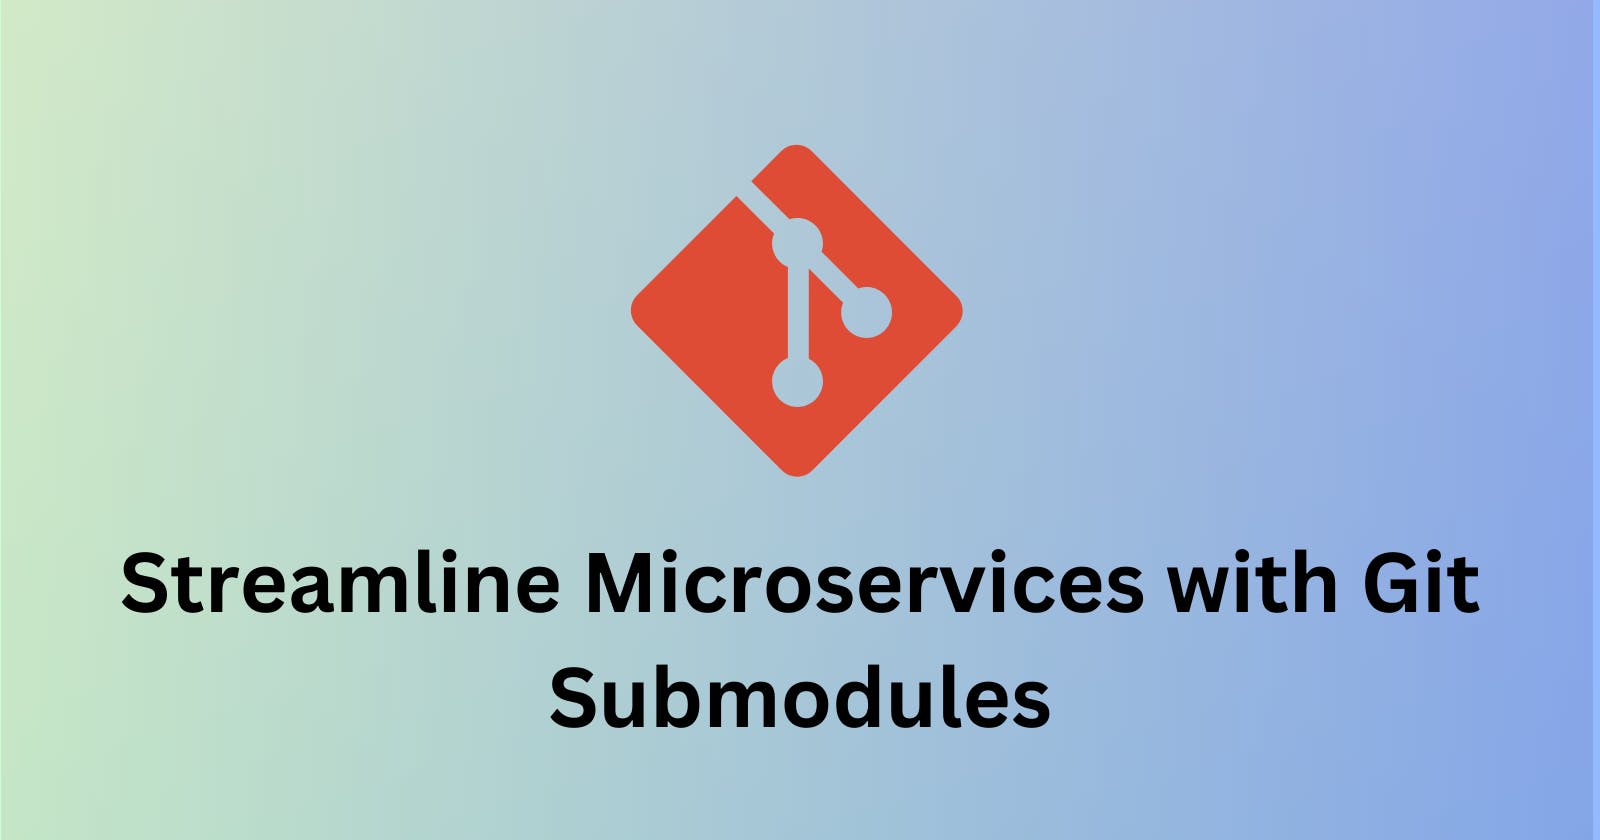 Git Submodules: A Game-Changer for Streamlining Microservices Development